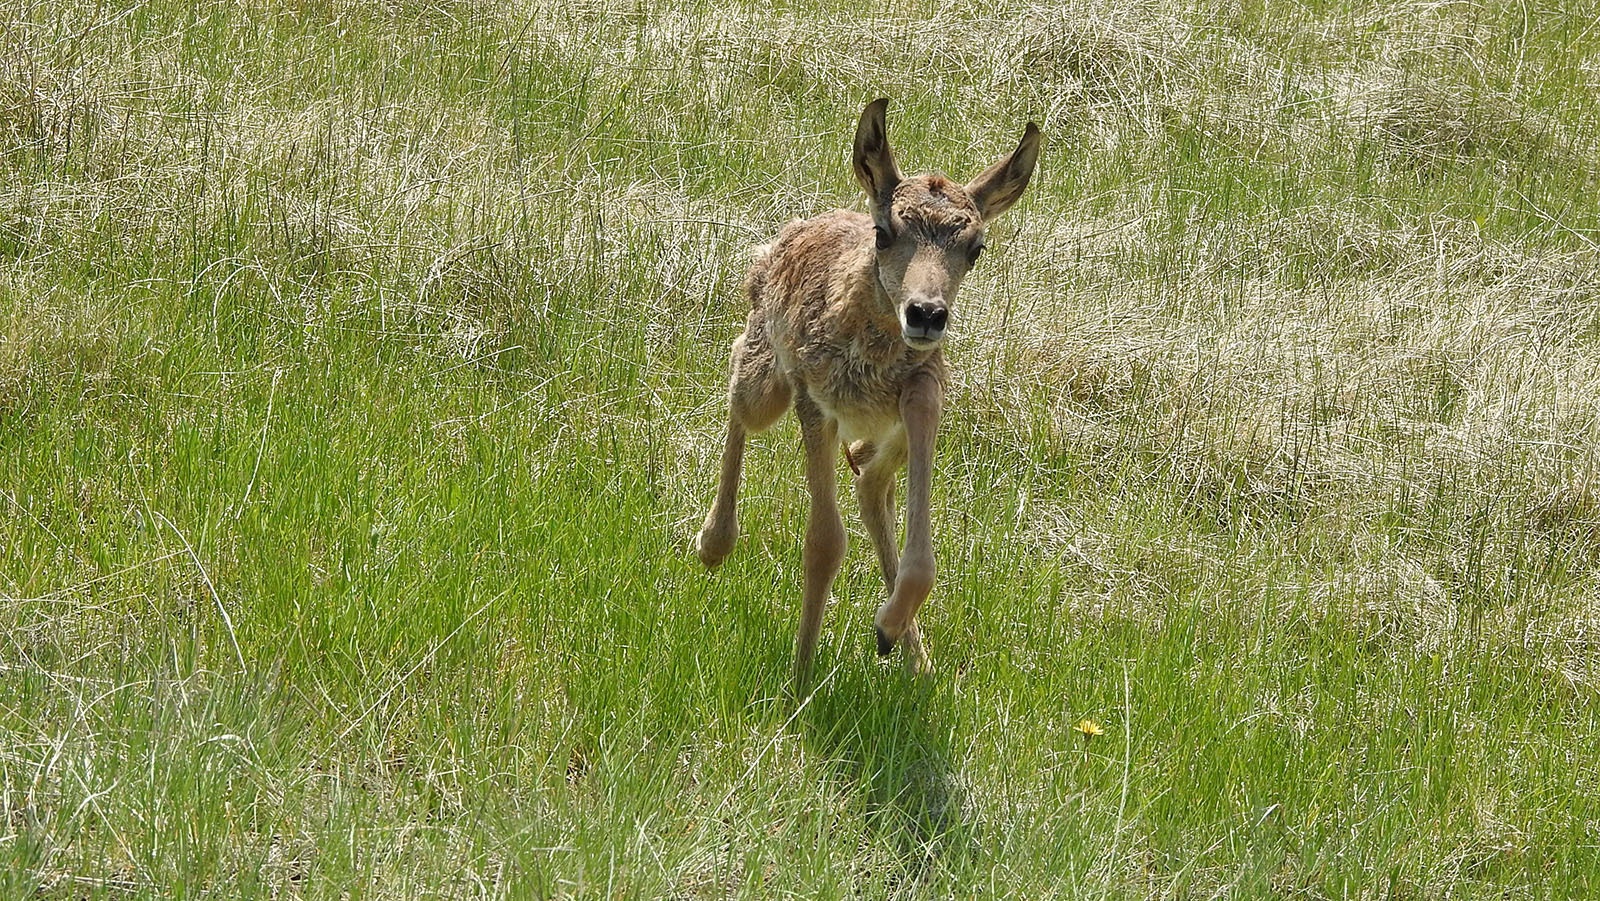 Stan Cannon said this newborn buck antelope had the tenacity to charge him last spring on his family’s property near Squaretop Mountain in Sublette County. This year, there are no doe or fawn antelope there.